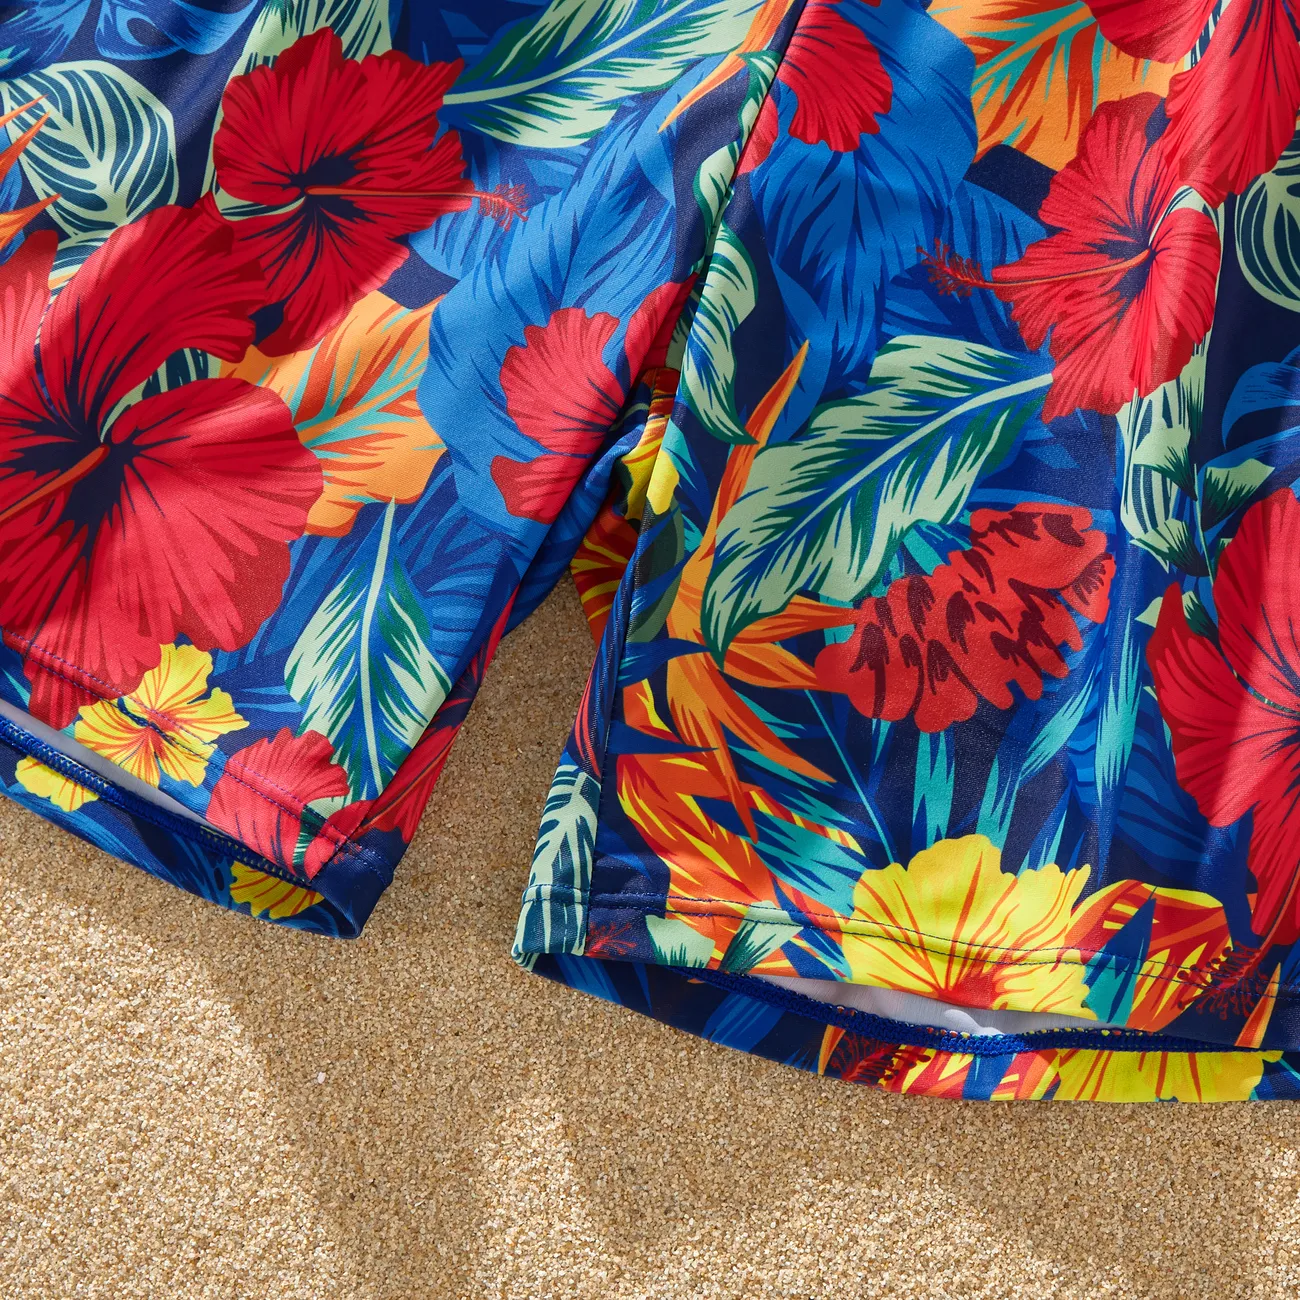 Family Matching Solid Scallop Trim Strappy Two-piece Swimsuit or Allover Floral Print Swim Trunks Shorts ColorBlock big image 1